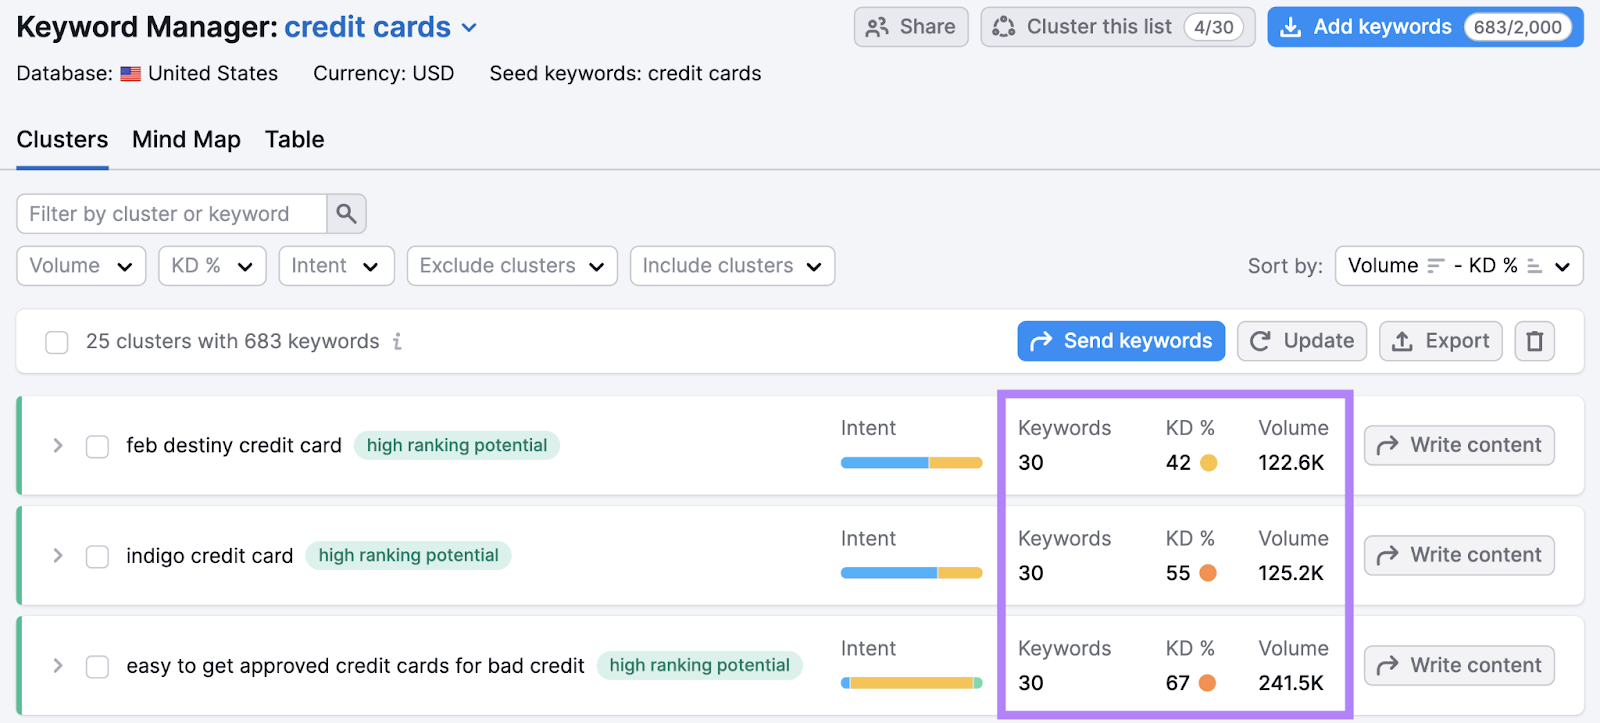 Clusters dashboard in Keyword Manager